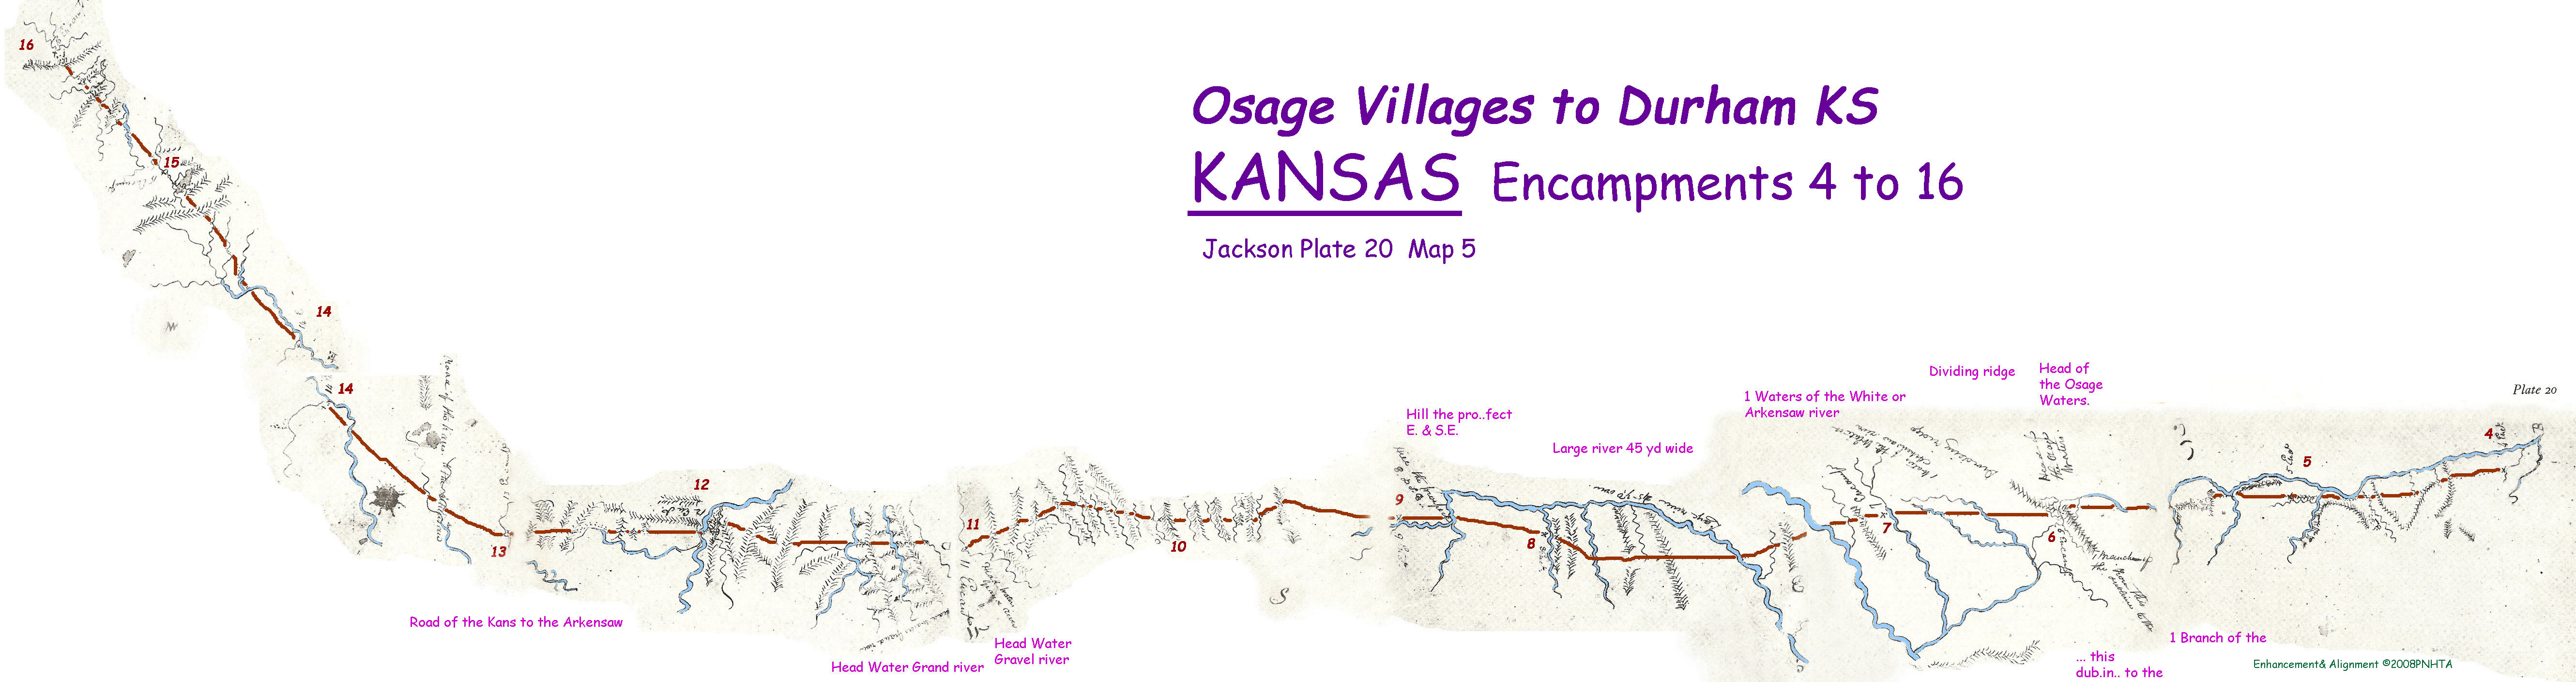 Map 5 (Field 20)- Osage Villages and on into Kansas on the Little Osage River (Jackson Plate 20)